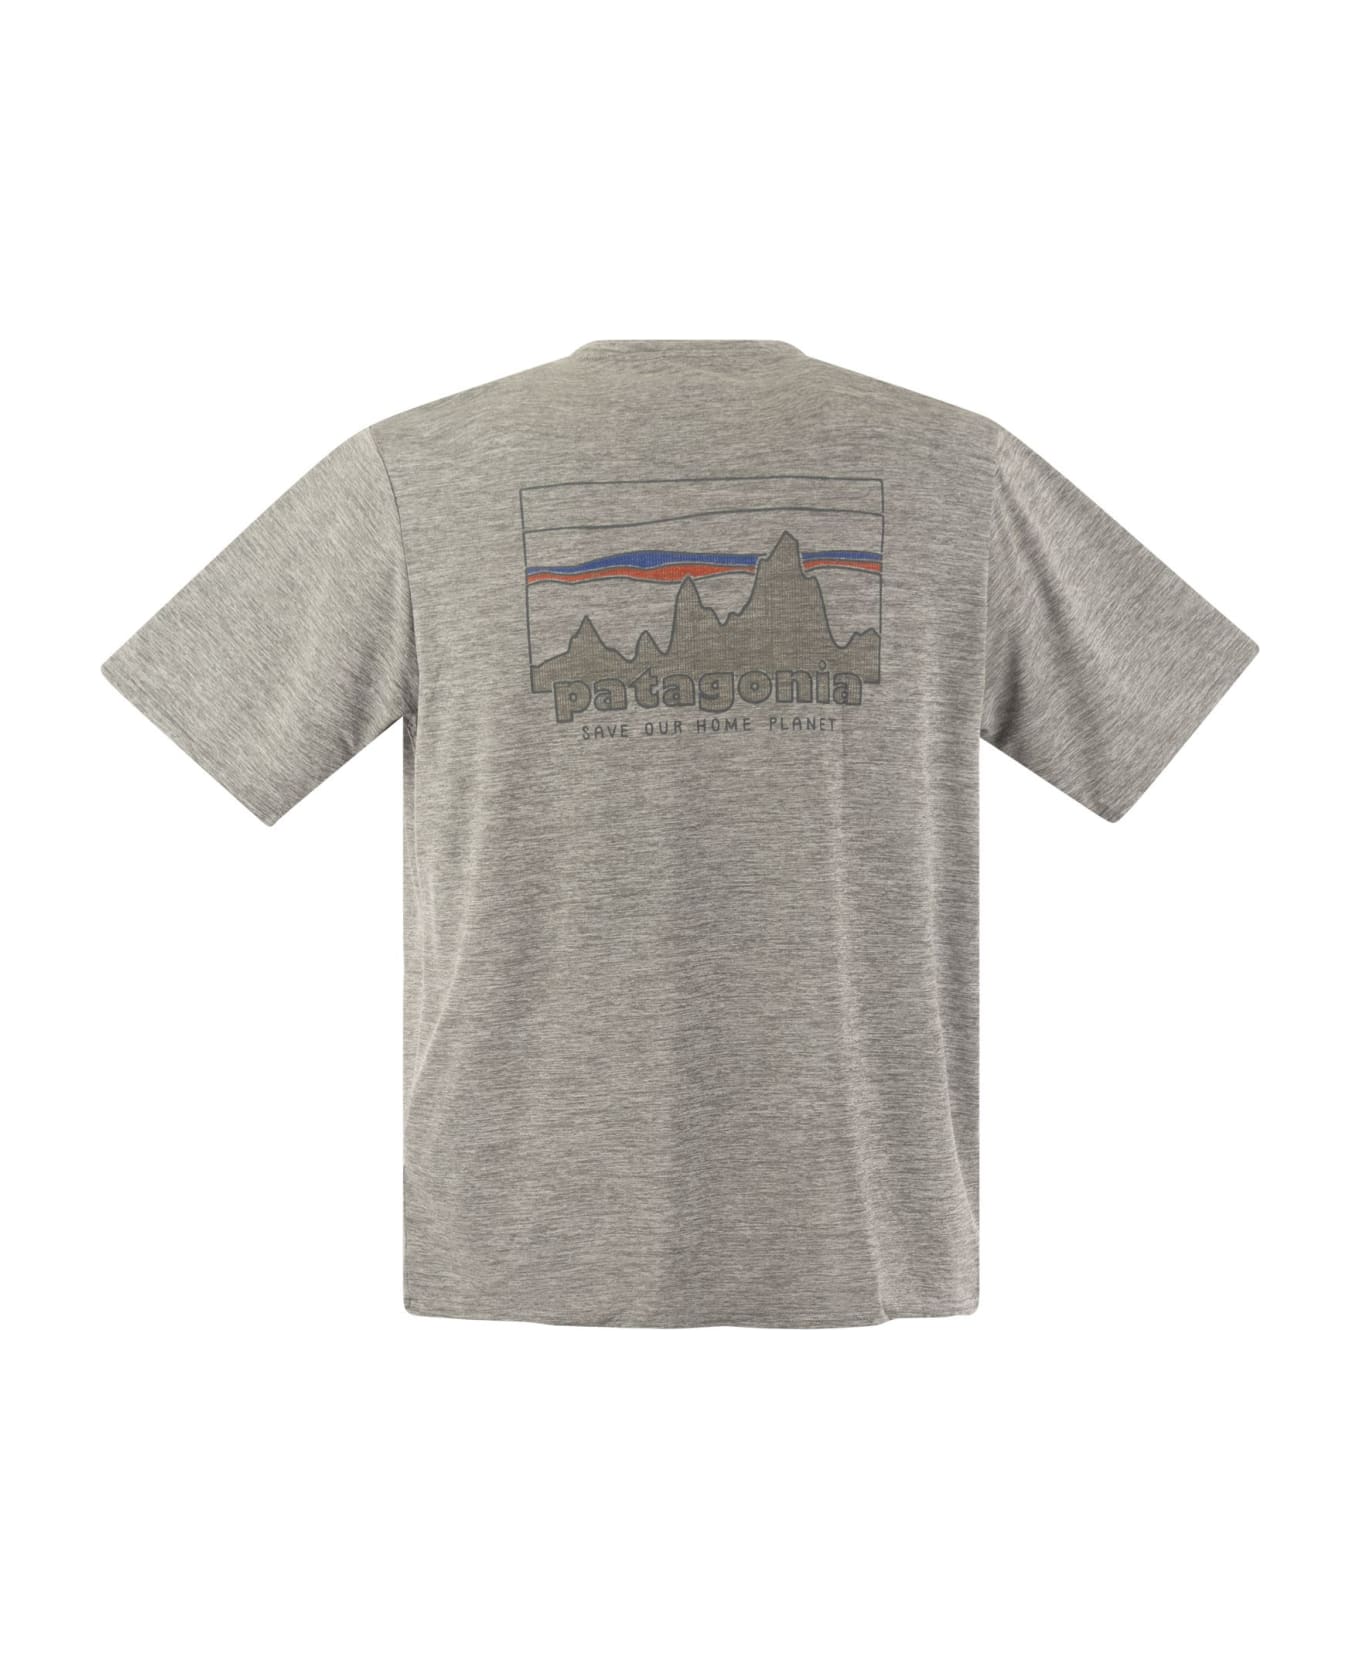 Patagonia T-shirt In Technical Fabric With Print On The Back - Grey